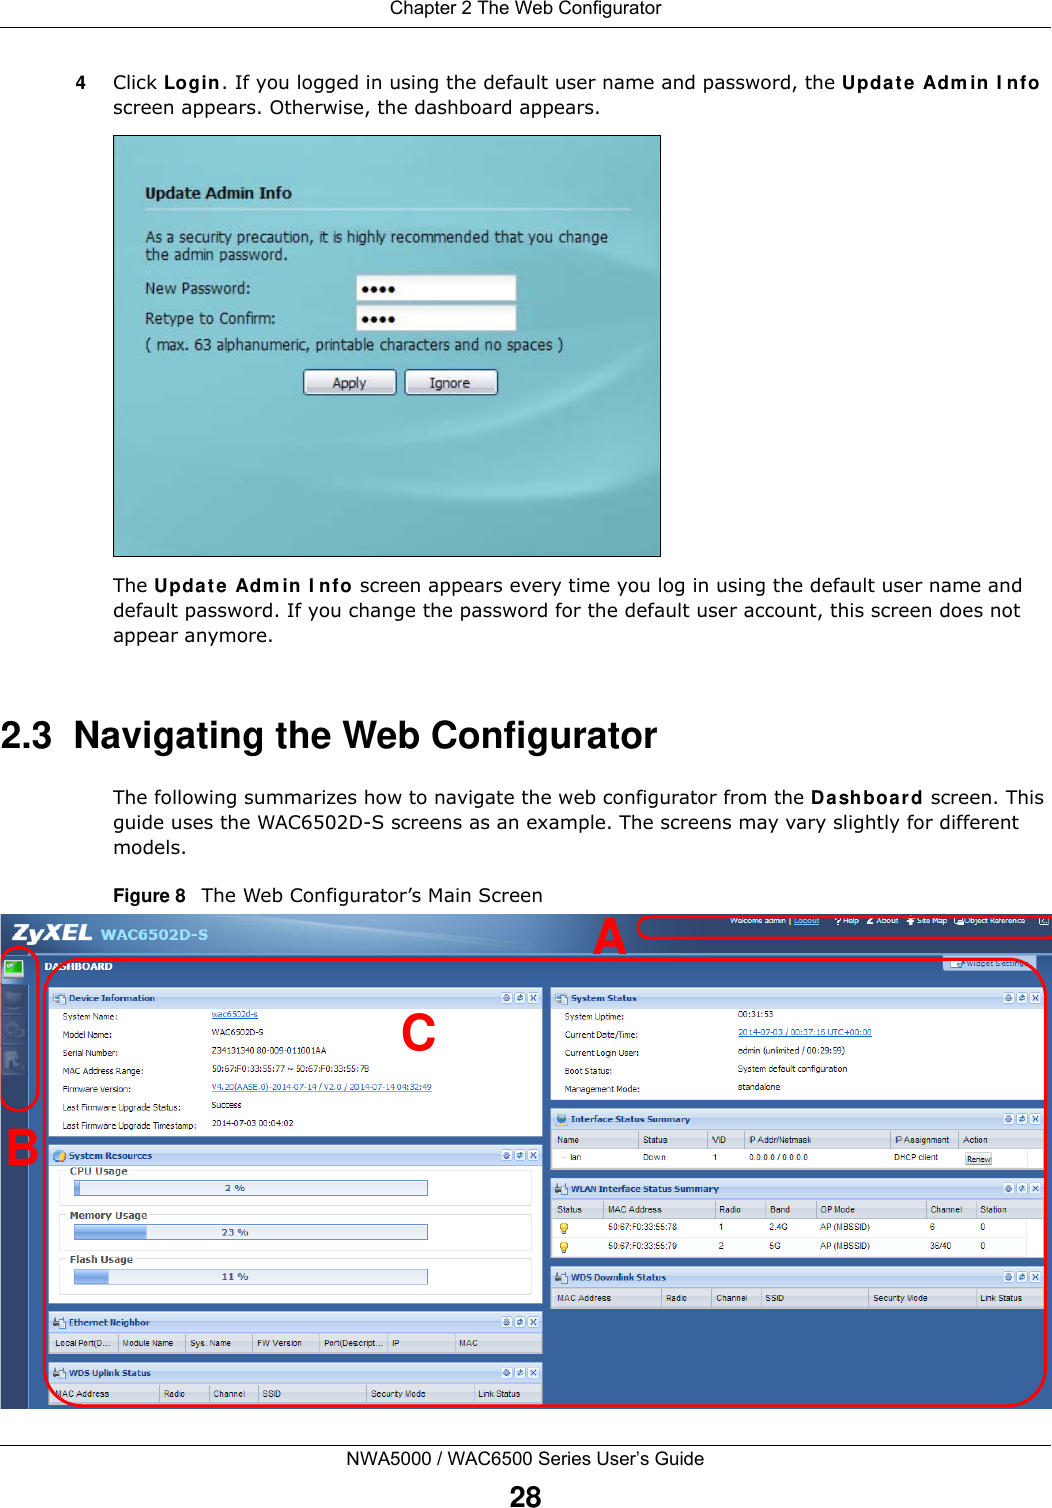 Chapter 2 The Web ConfiguratorNWA5000 / WAC6500 Series User’s Guide284Click Login. If you logged in using the default user name and password, the Updat e  Adm in I nfo screen appears. Otherwise, the dashboard appears. The Updat e Adm in I nfo screen appears every time you log in using the default user name and default password. If you change the password for the default user account, this screen does not appear anymore.2.3  Navigating the Web ConfiguratorThe following summarizes how to navigate the web configurator from the Da shboard screen. This guide uses the WAC6502D-S screens as an example. The screens may vary slightly for different models.Figure 8   The Web Configurator’s Main Screen ACB